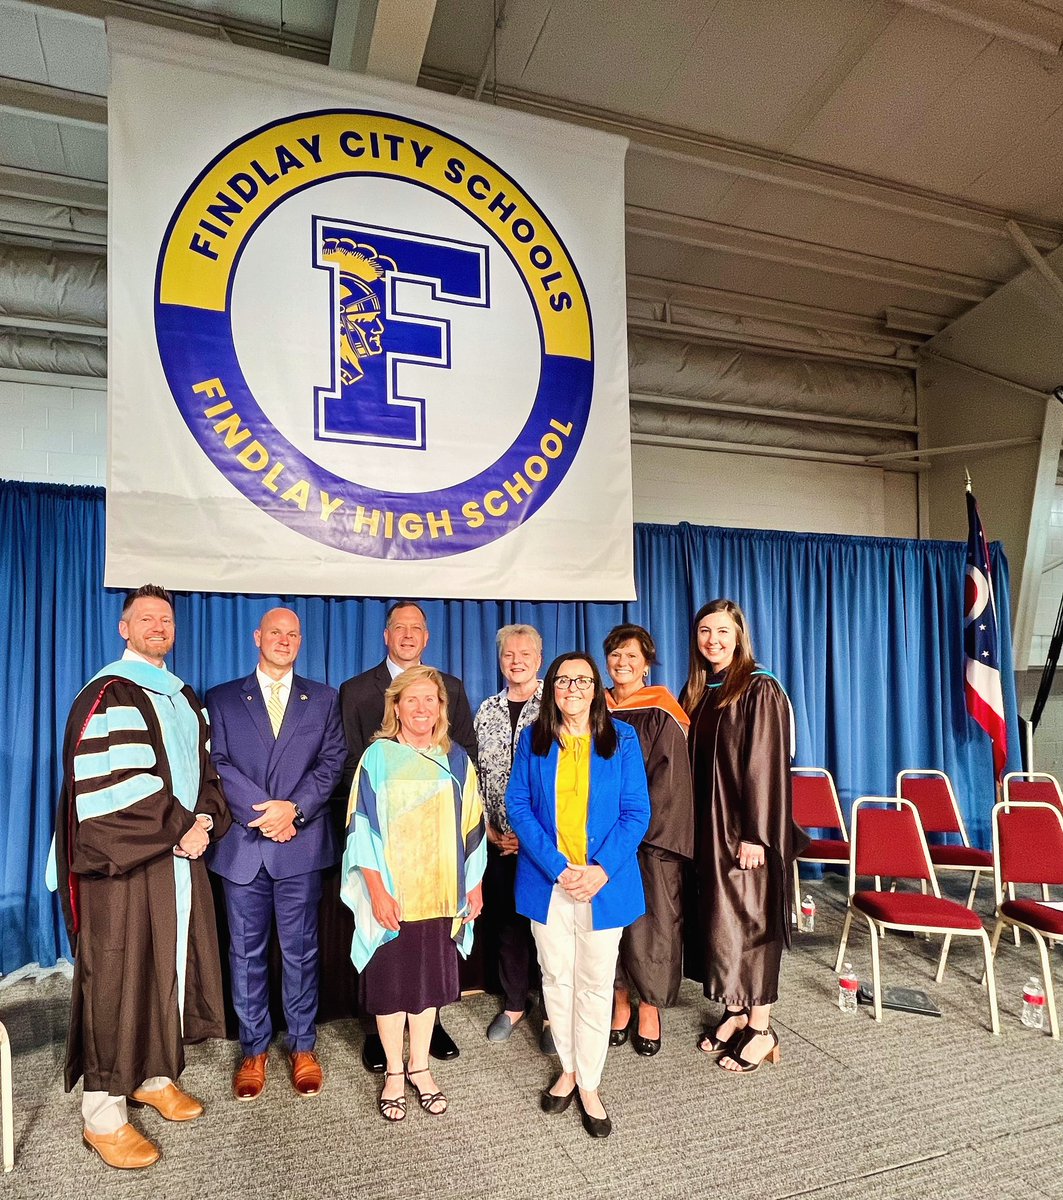 So honored to serve as superintendent of this amazing district! Extremely fortunate to serve alongside a board of education and team that puts students first. Congratulations to the FHS #classof2024 - an extremely talented group of young adults! #TrojanTrue💙💛